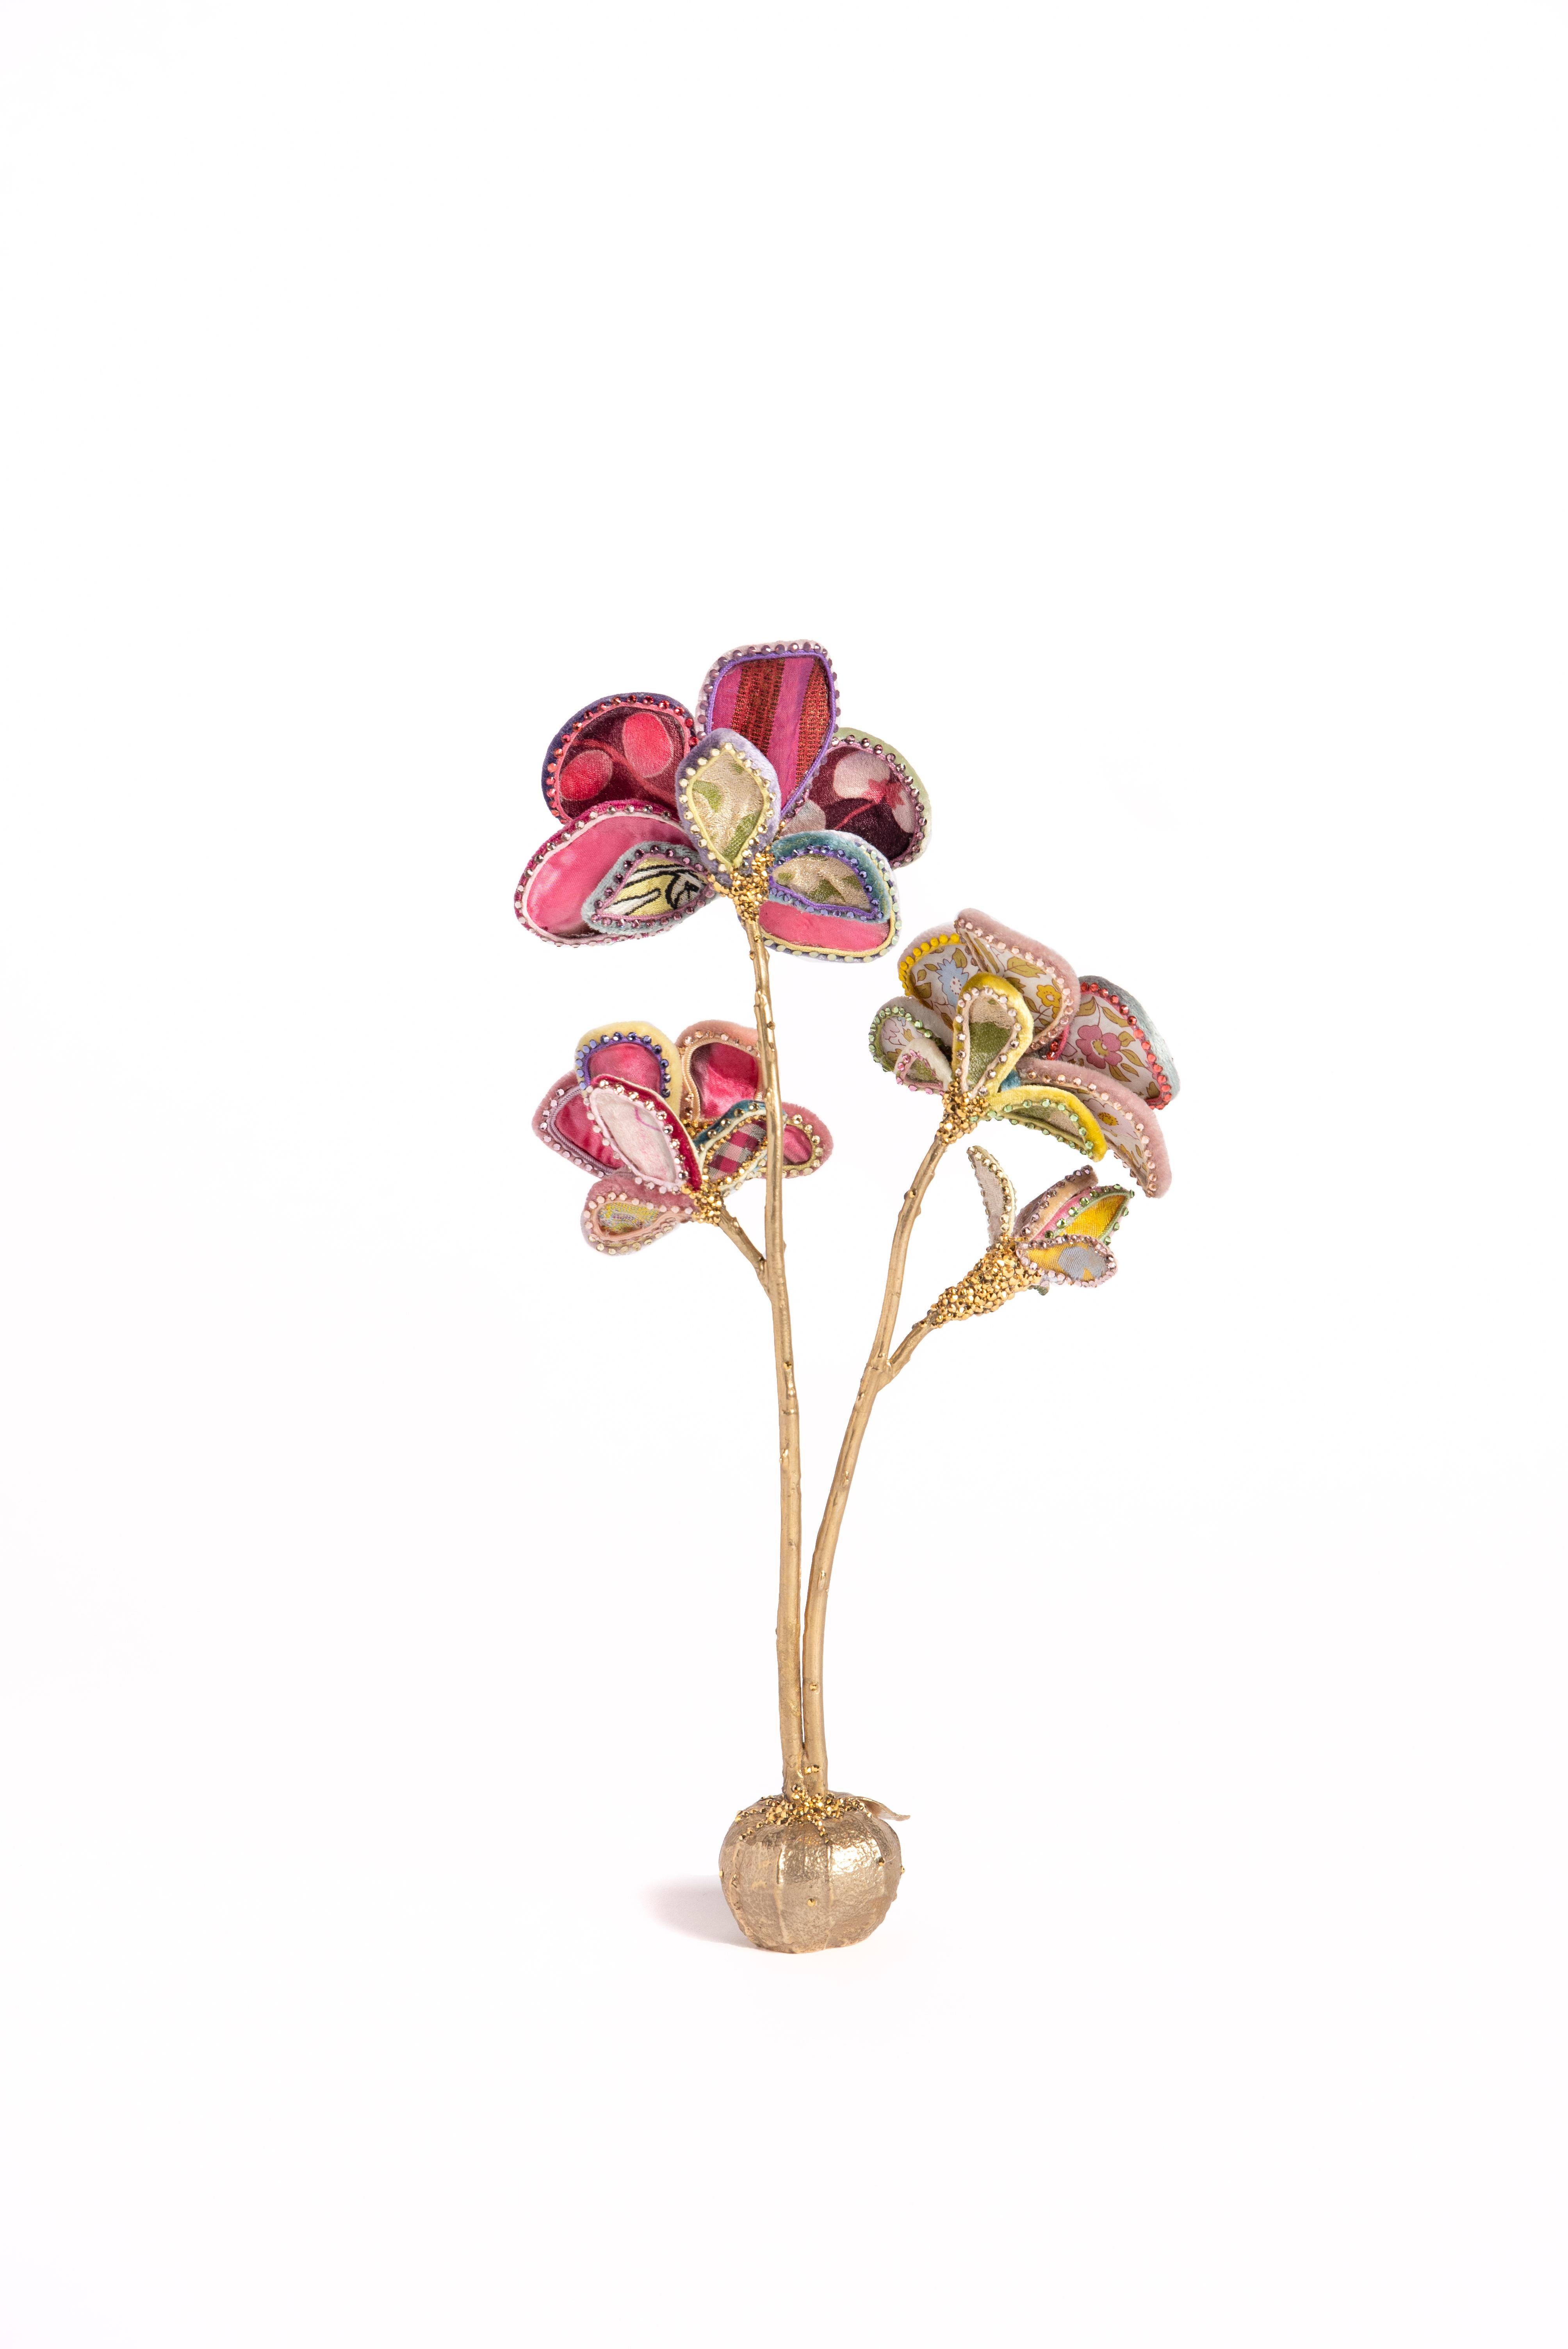 Pale Pink & White-toned Orchid in silk and velvet resting upon a bulb-shaped brass base. Adorned with vintage millinery embellishments, European crystals, and vintage faux-stamen. Designed and handmade in NYC. Comes in both stoned & un-stoned